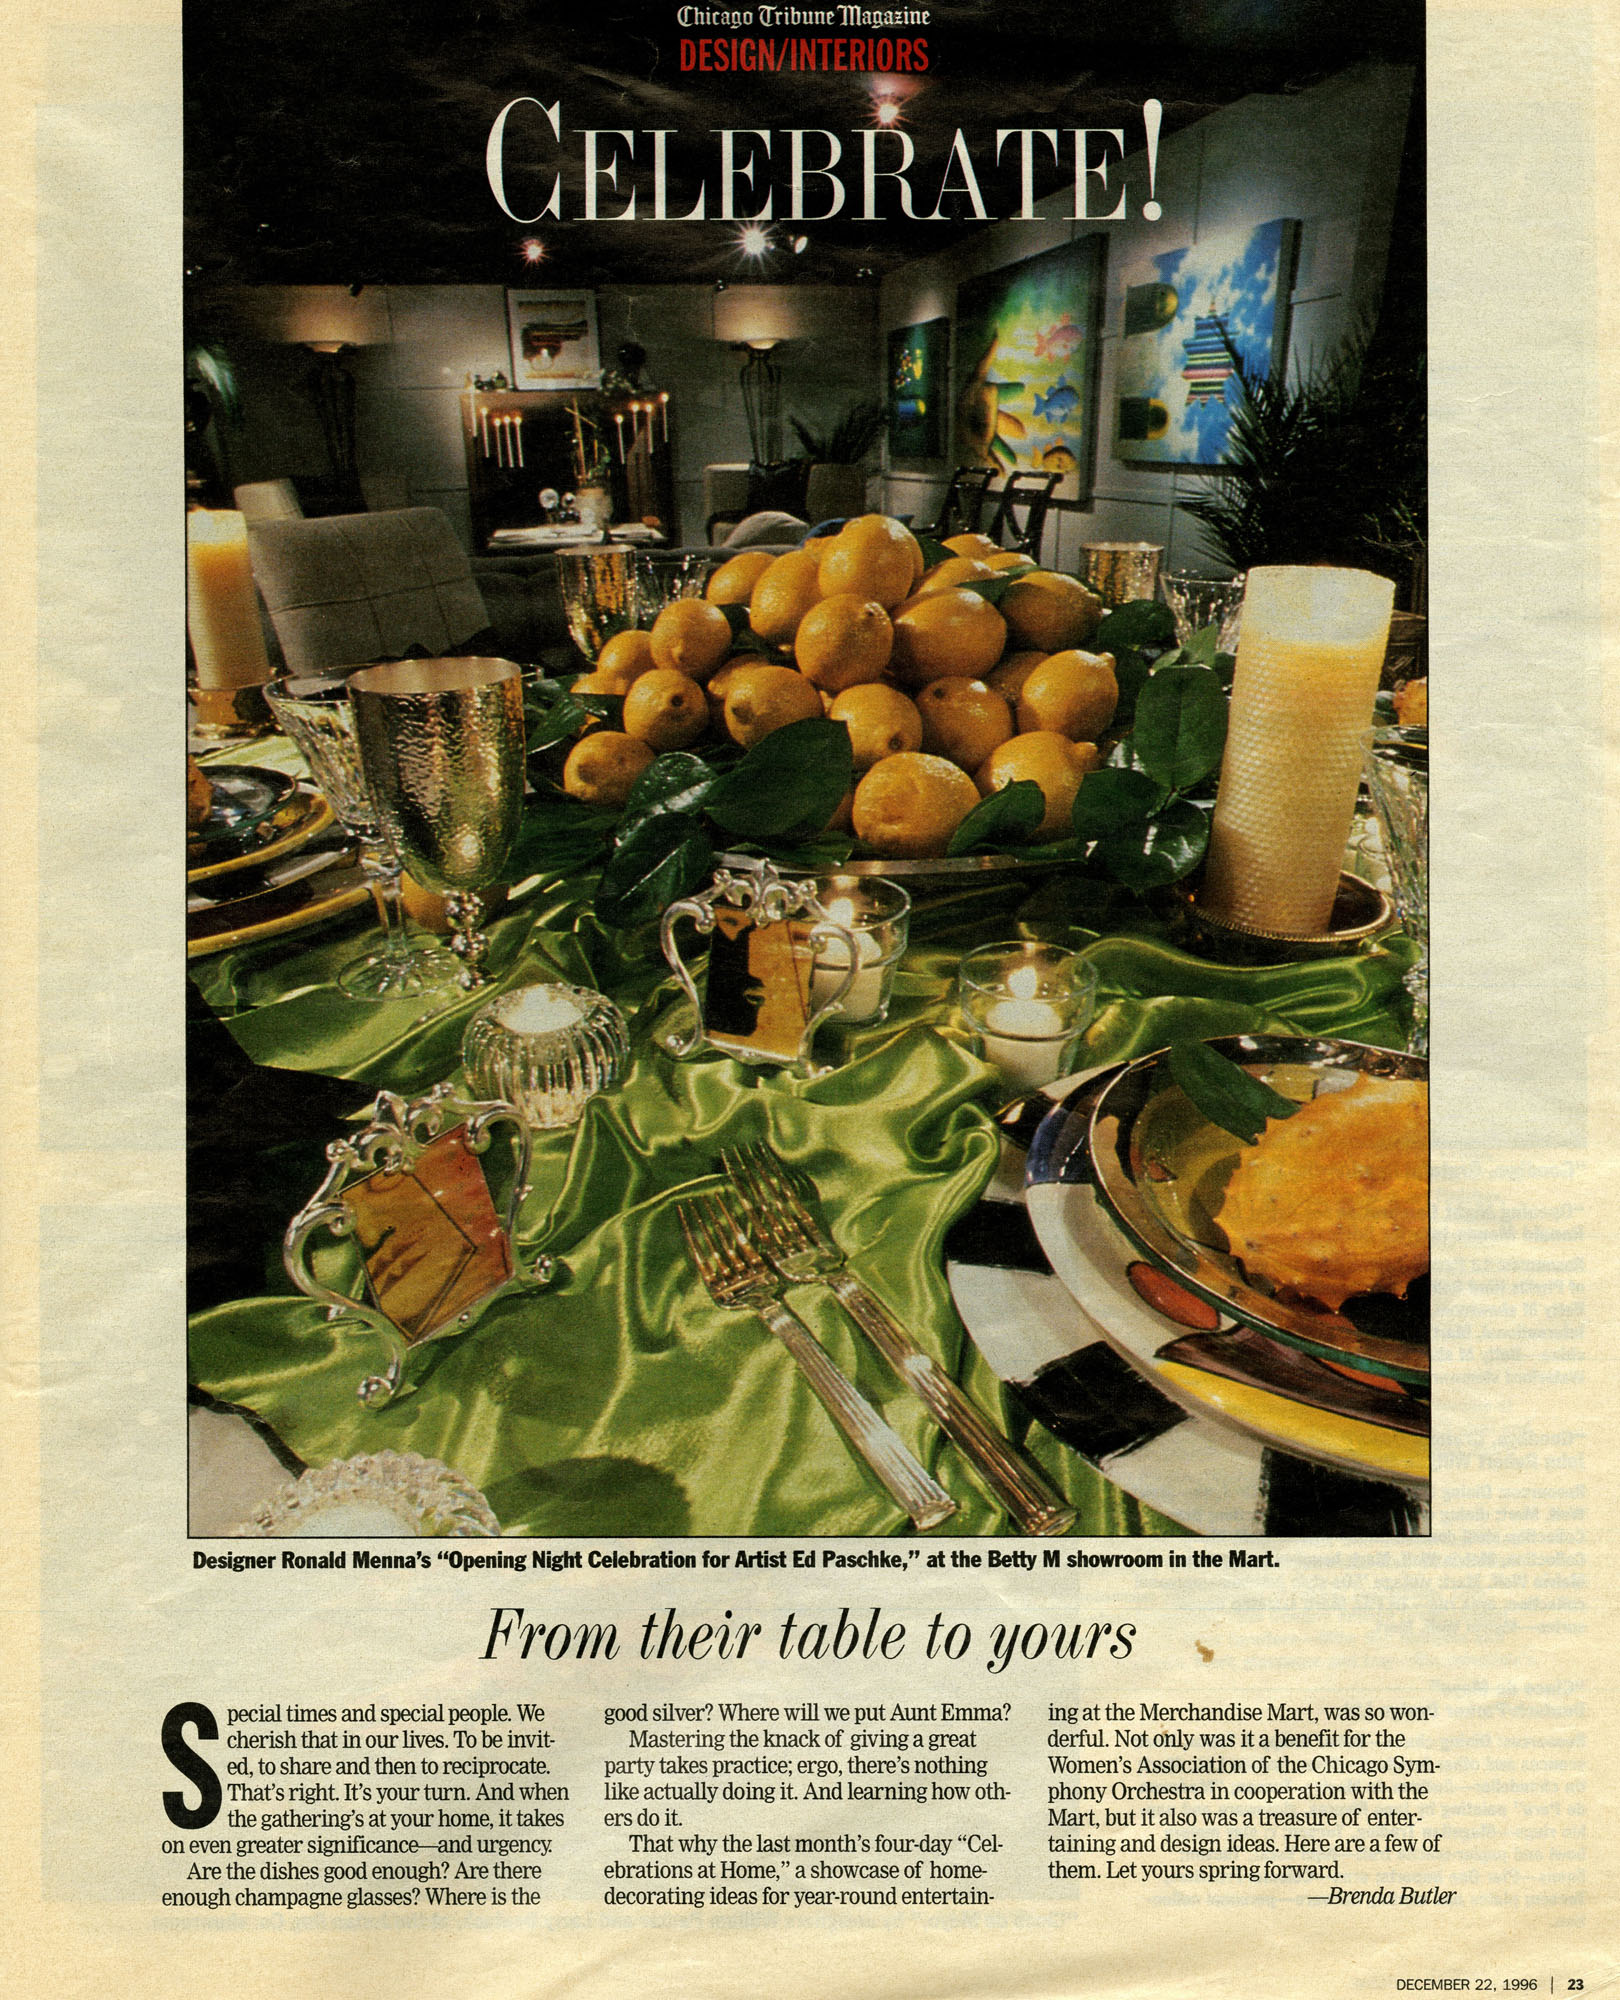 dec22,1996 chicago tribune magazine- From Their Table to Yours